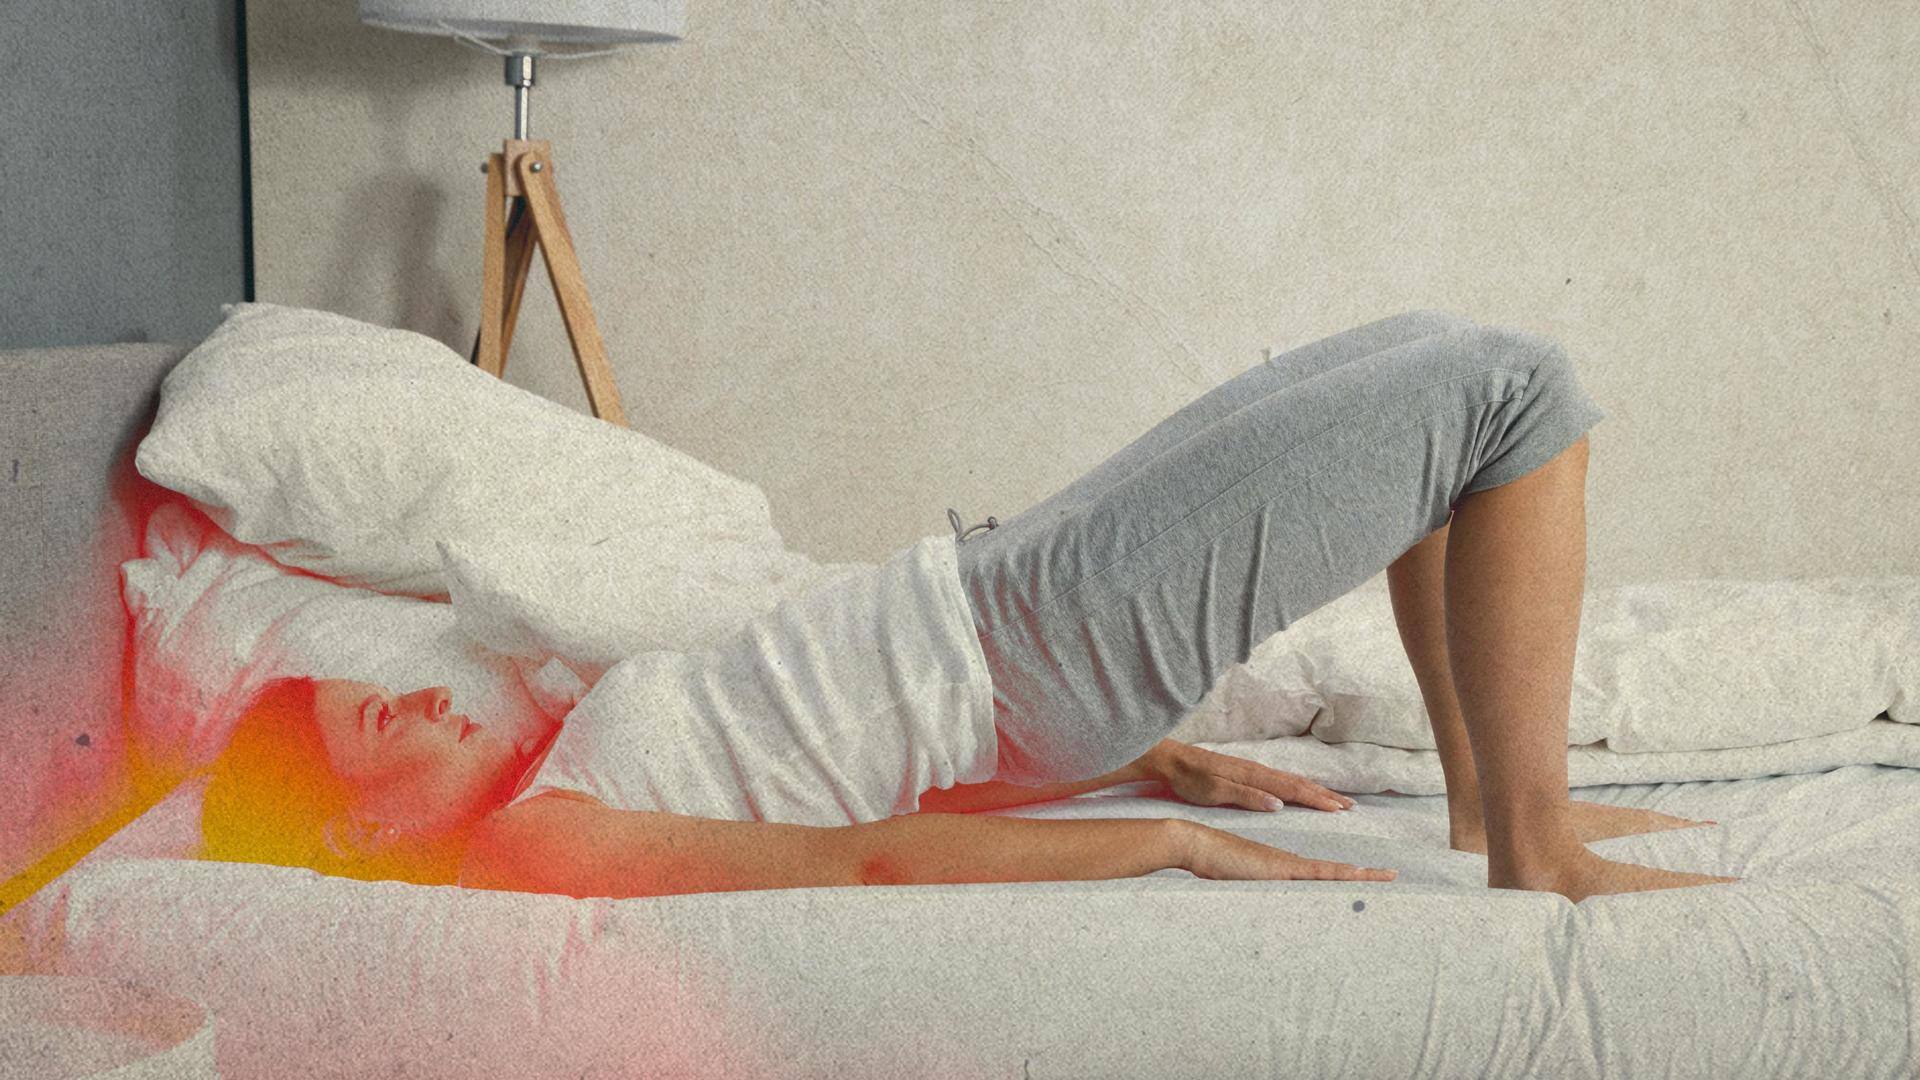 5 exercises you can do without getting up from bed